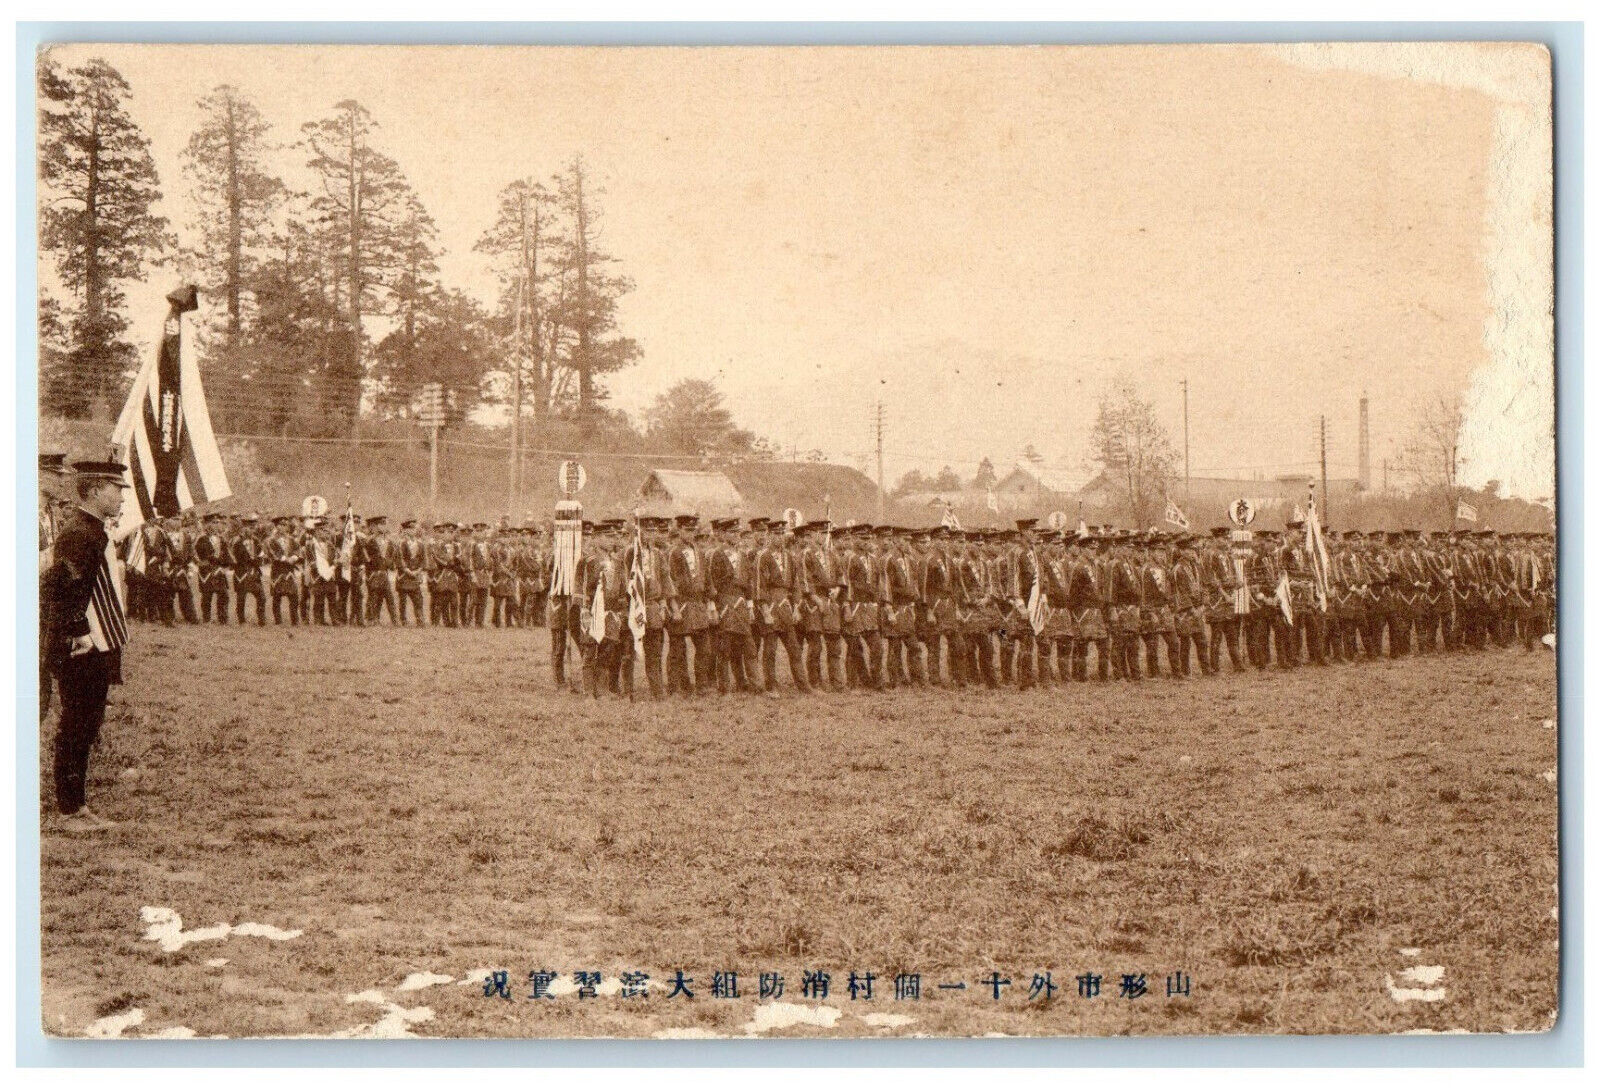 c1920's Fire Prevention Large Group at Xingshian Qianwei City China Postcard